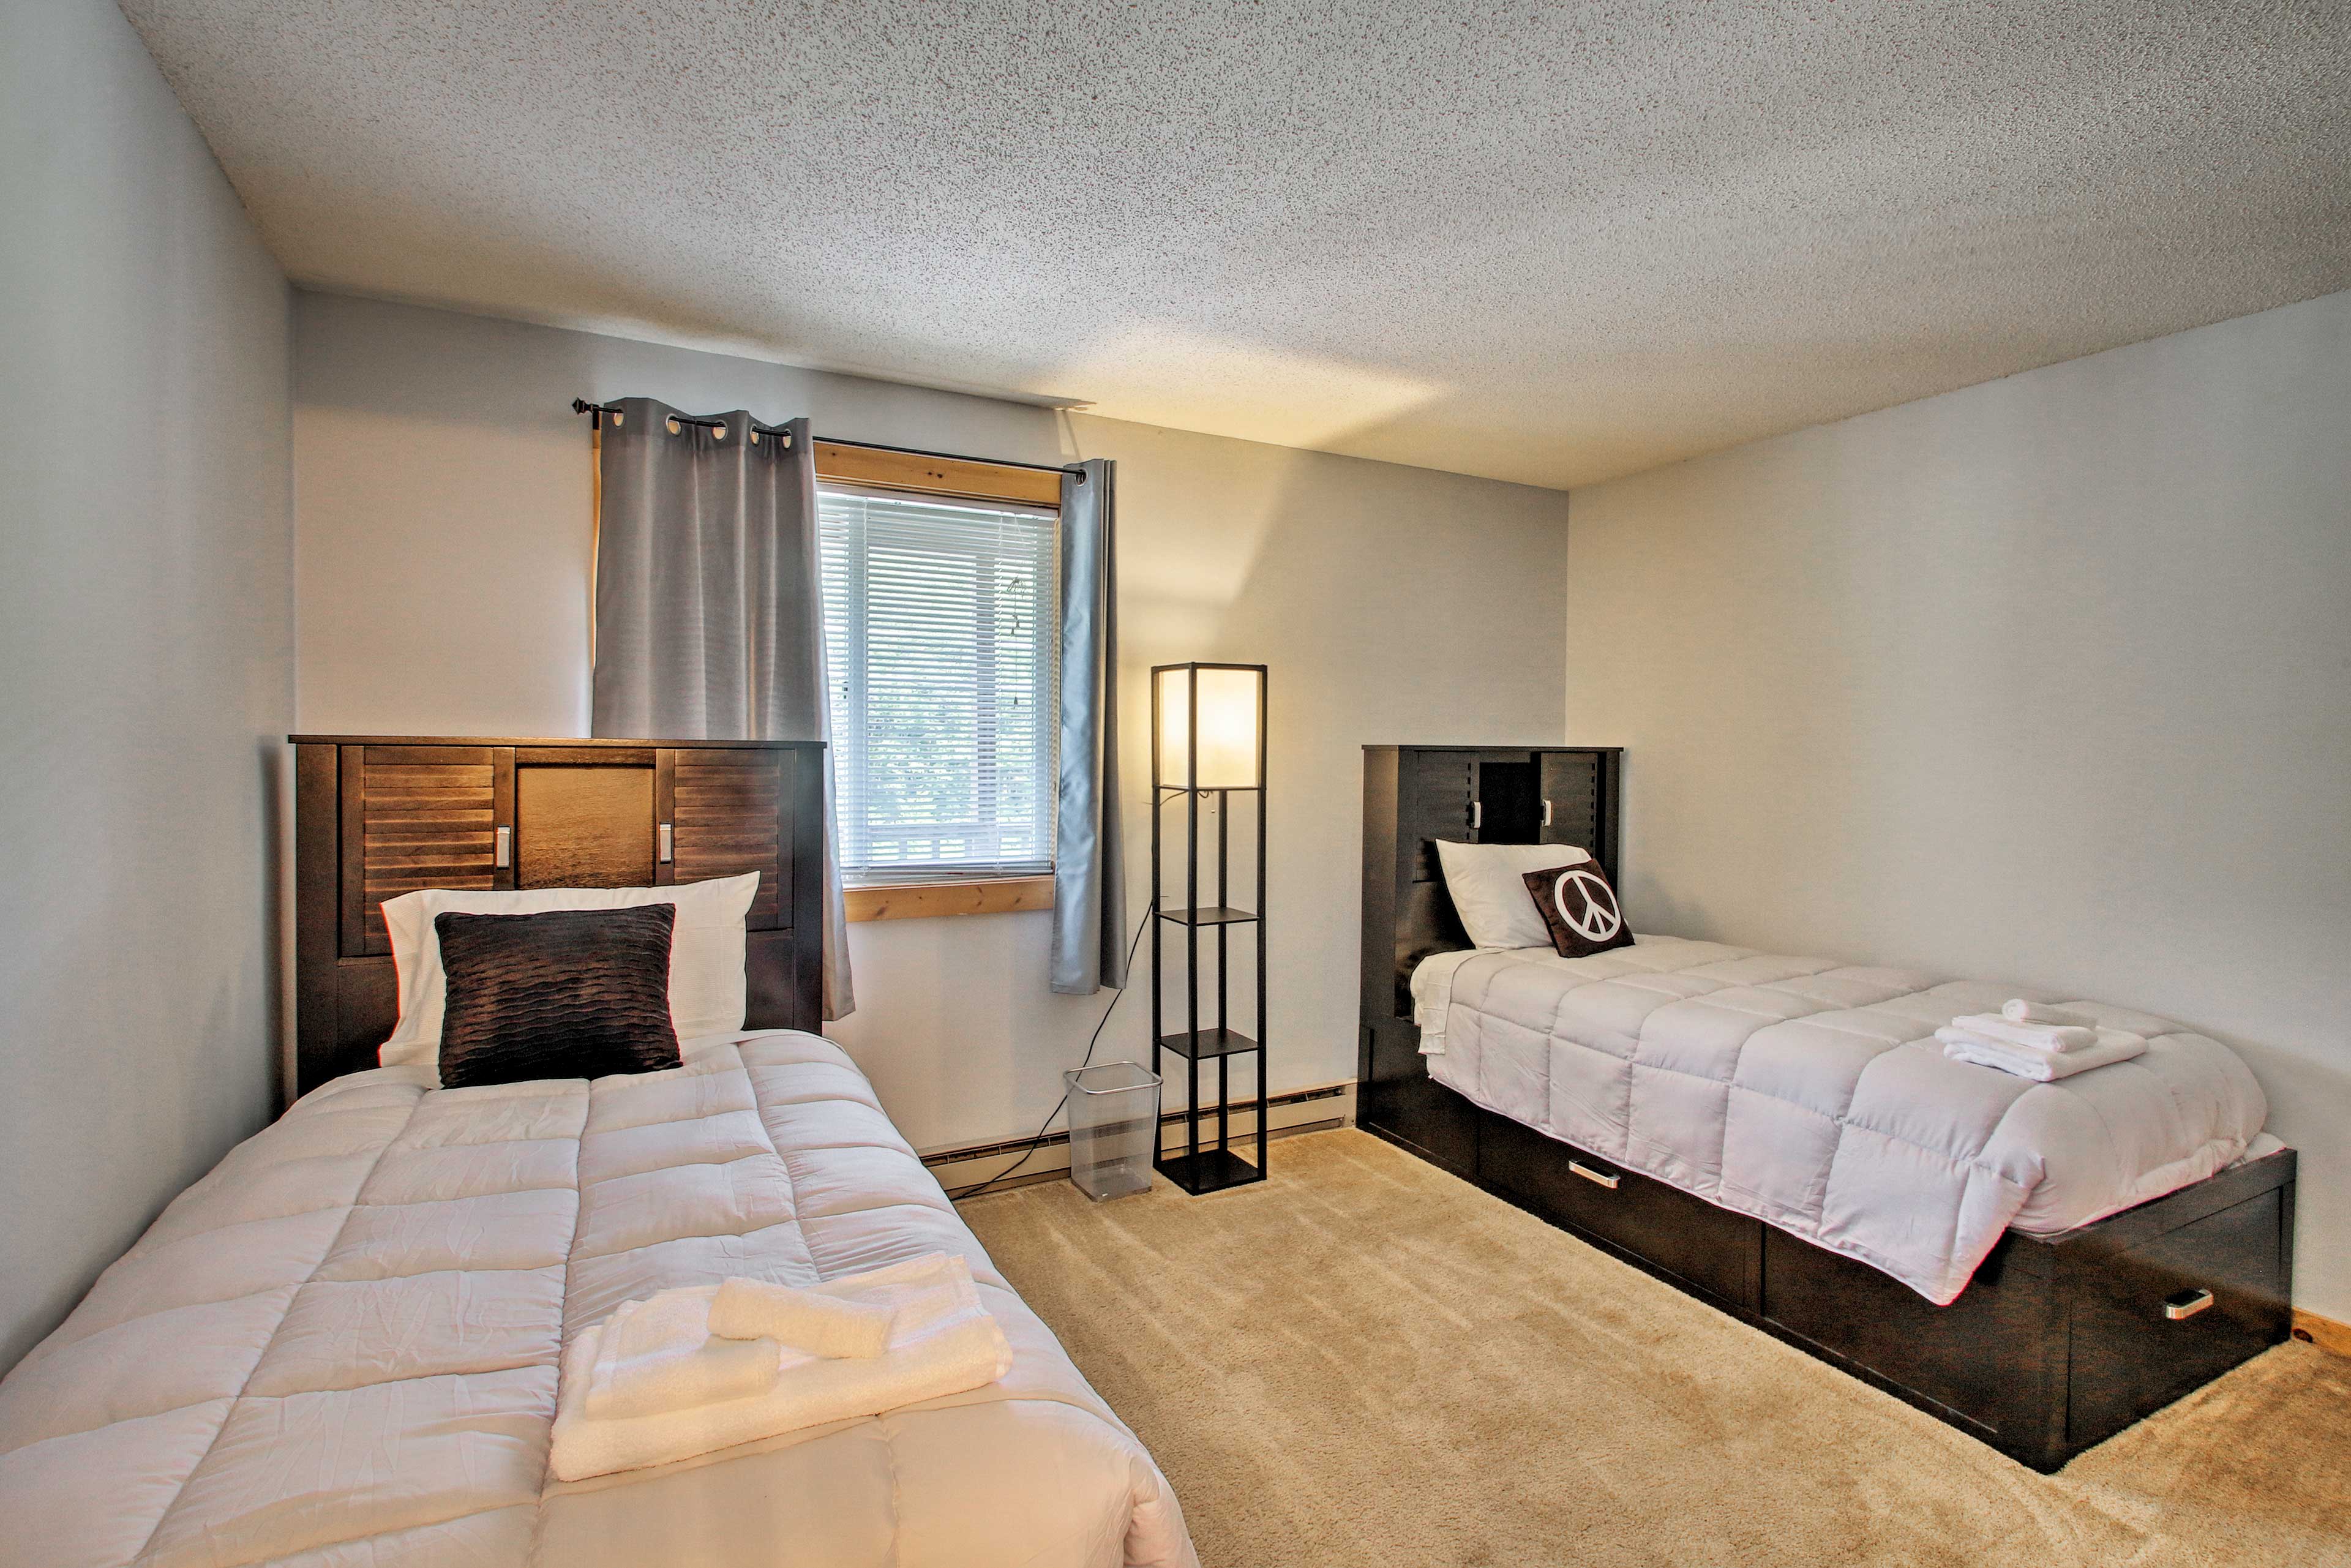 This bedroom now features a queen bed & twin bunk bed.